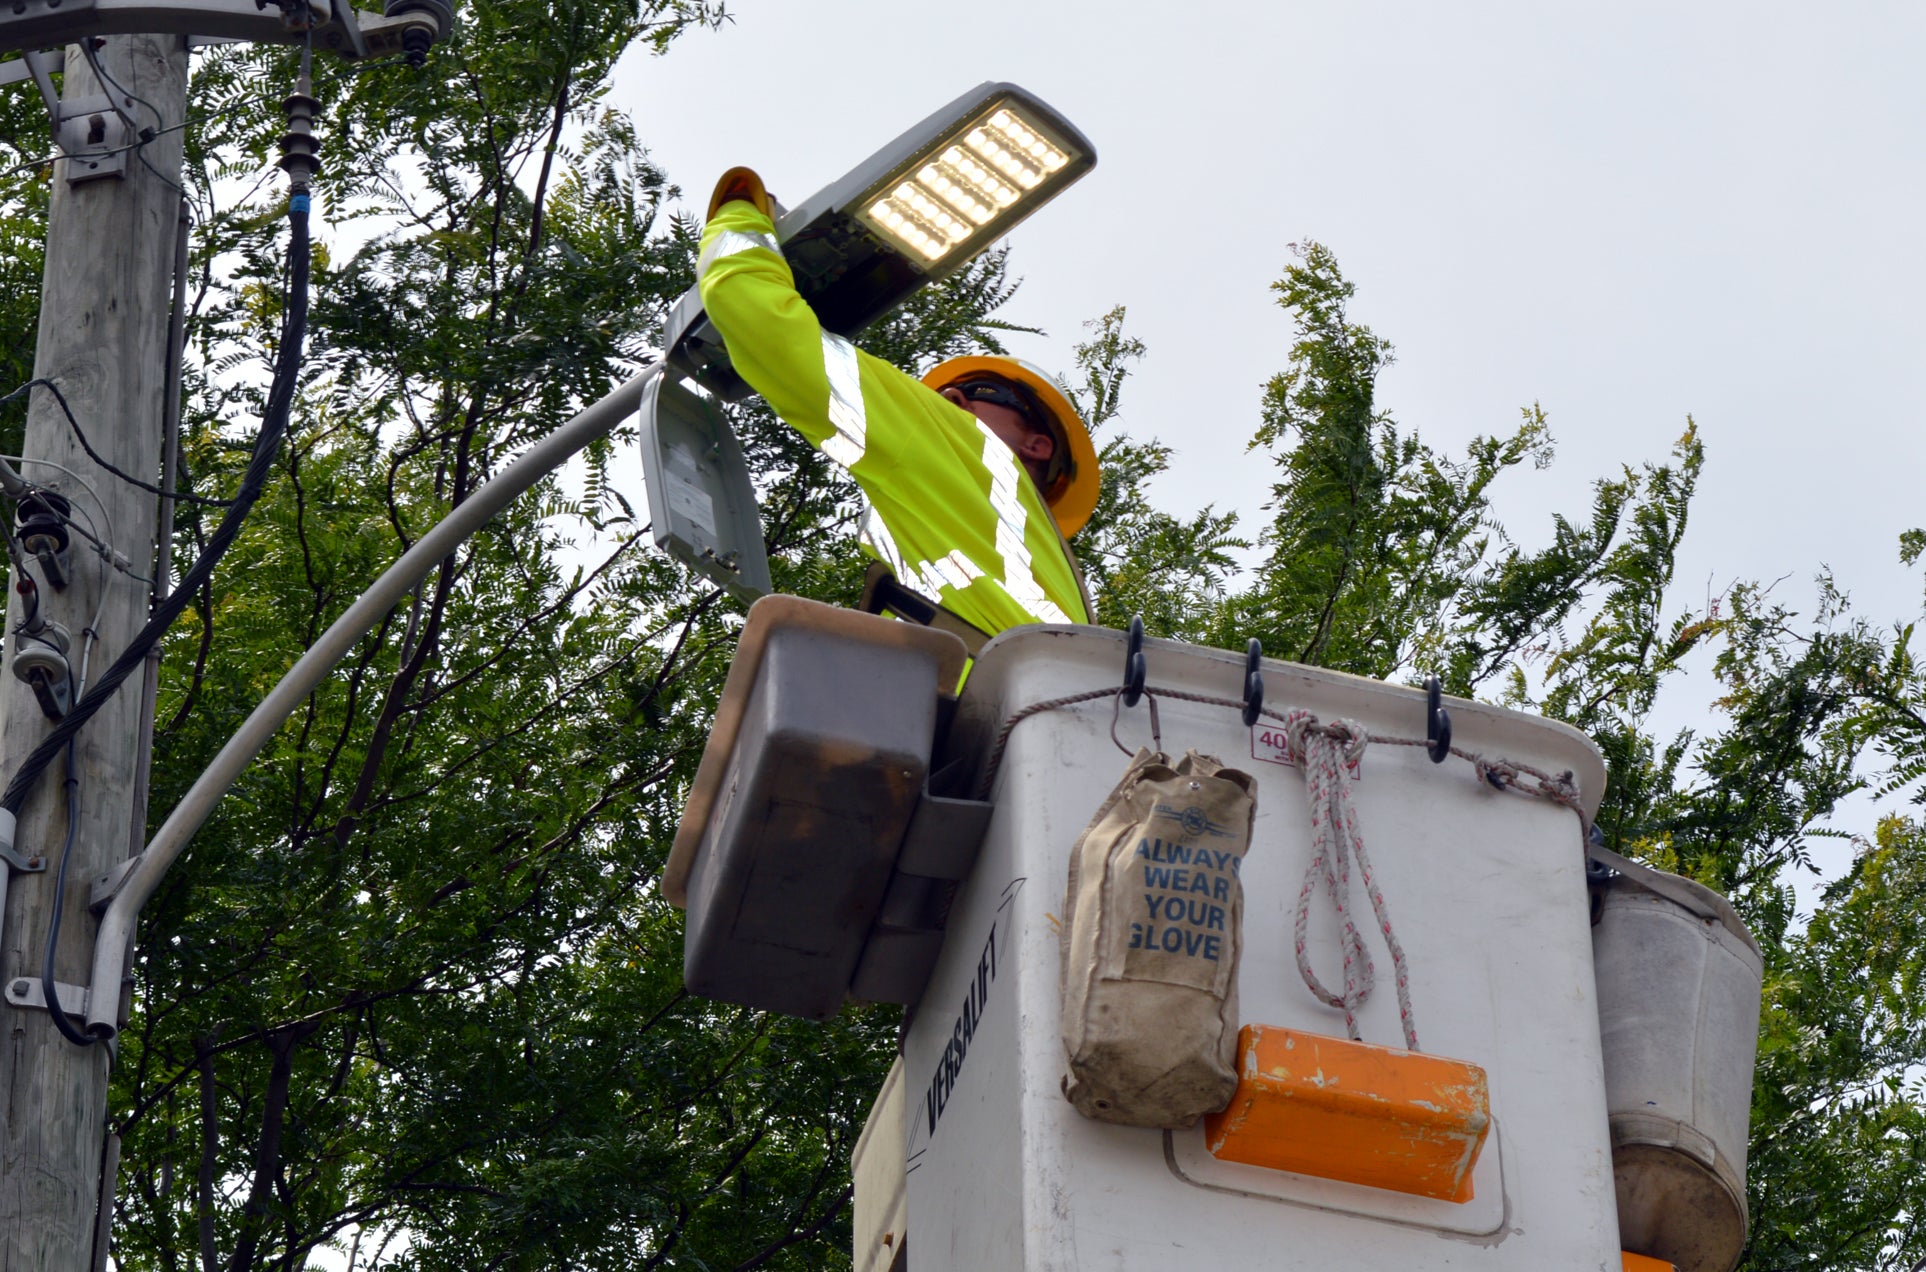  Atlantic City Electric's Sean Smith installs LED lighting in Sicklerville, New Jersey. (Atlantic City Electric photo) 